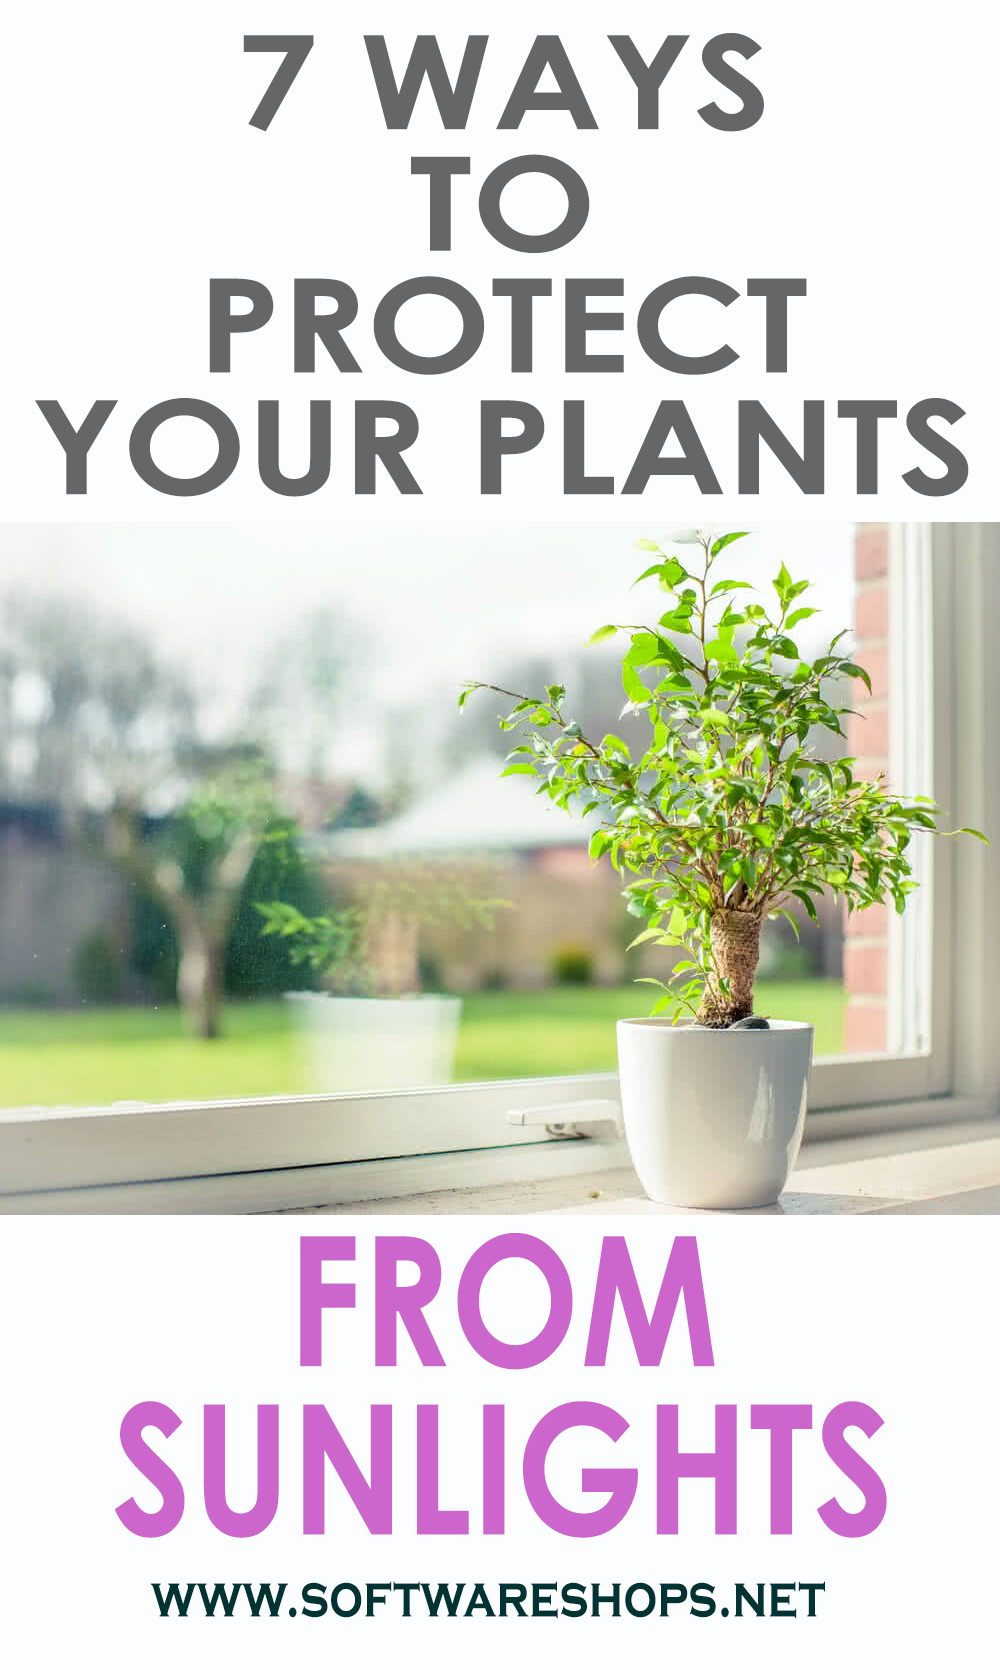 7 way to protect your plants from sunlight